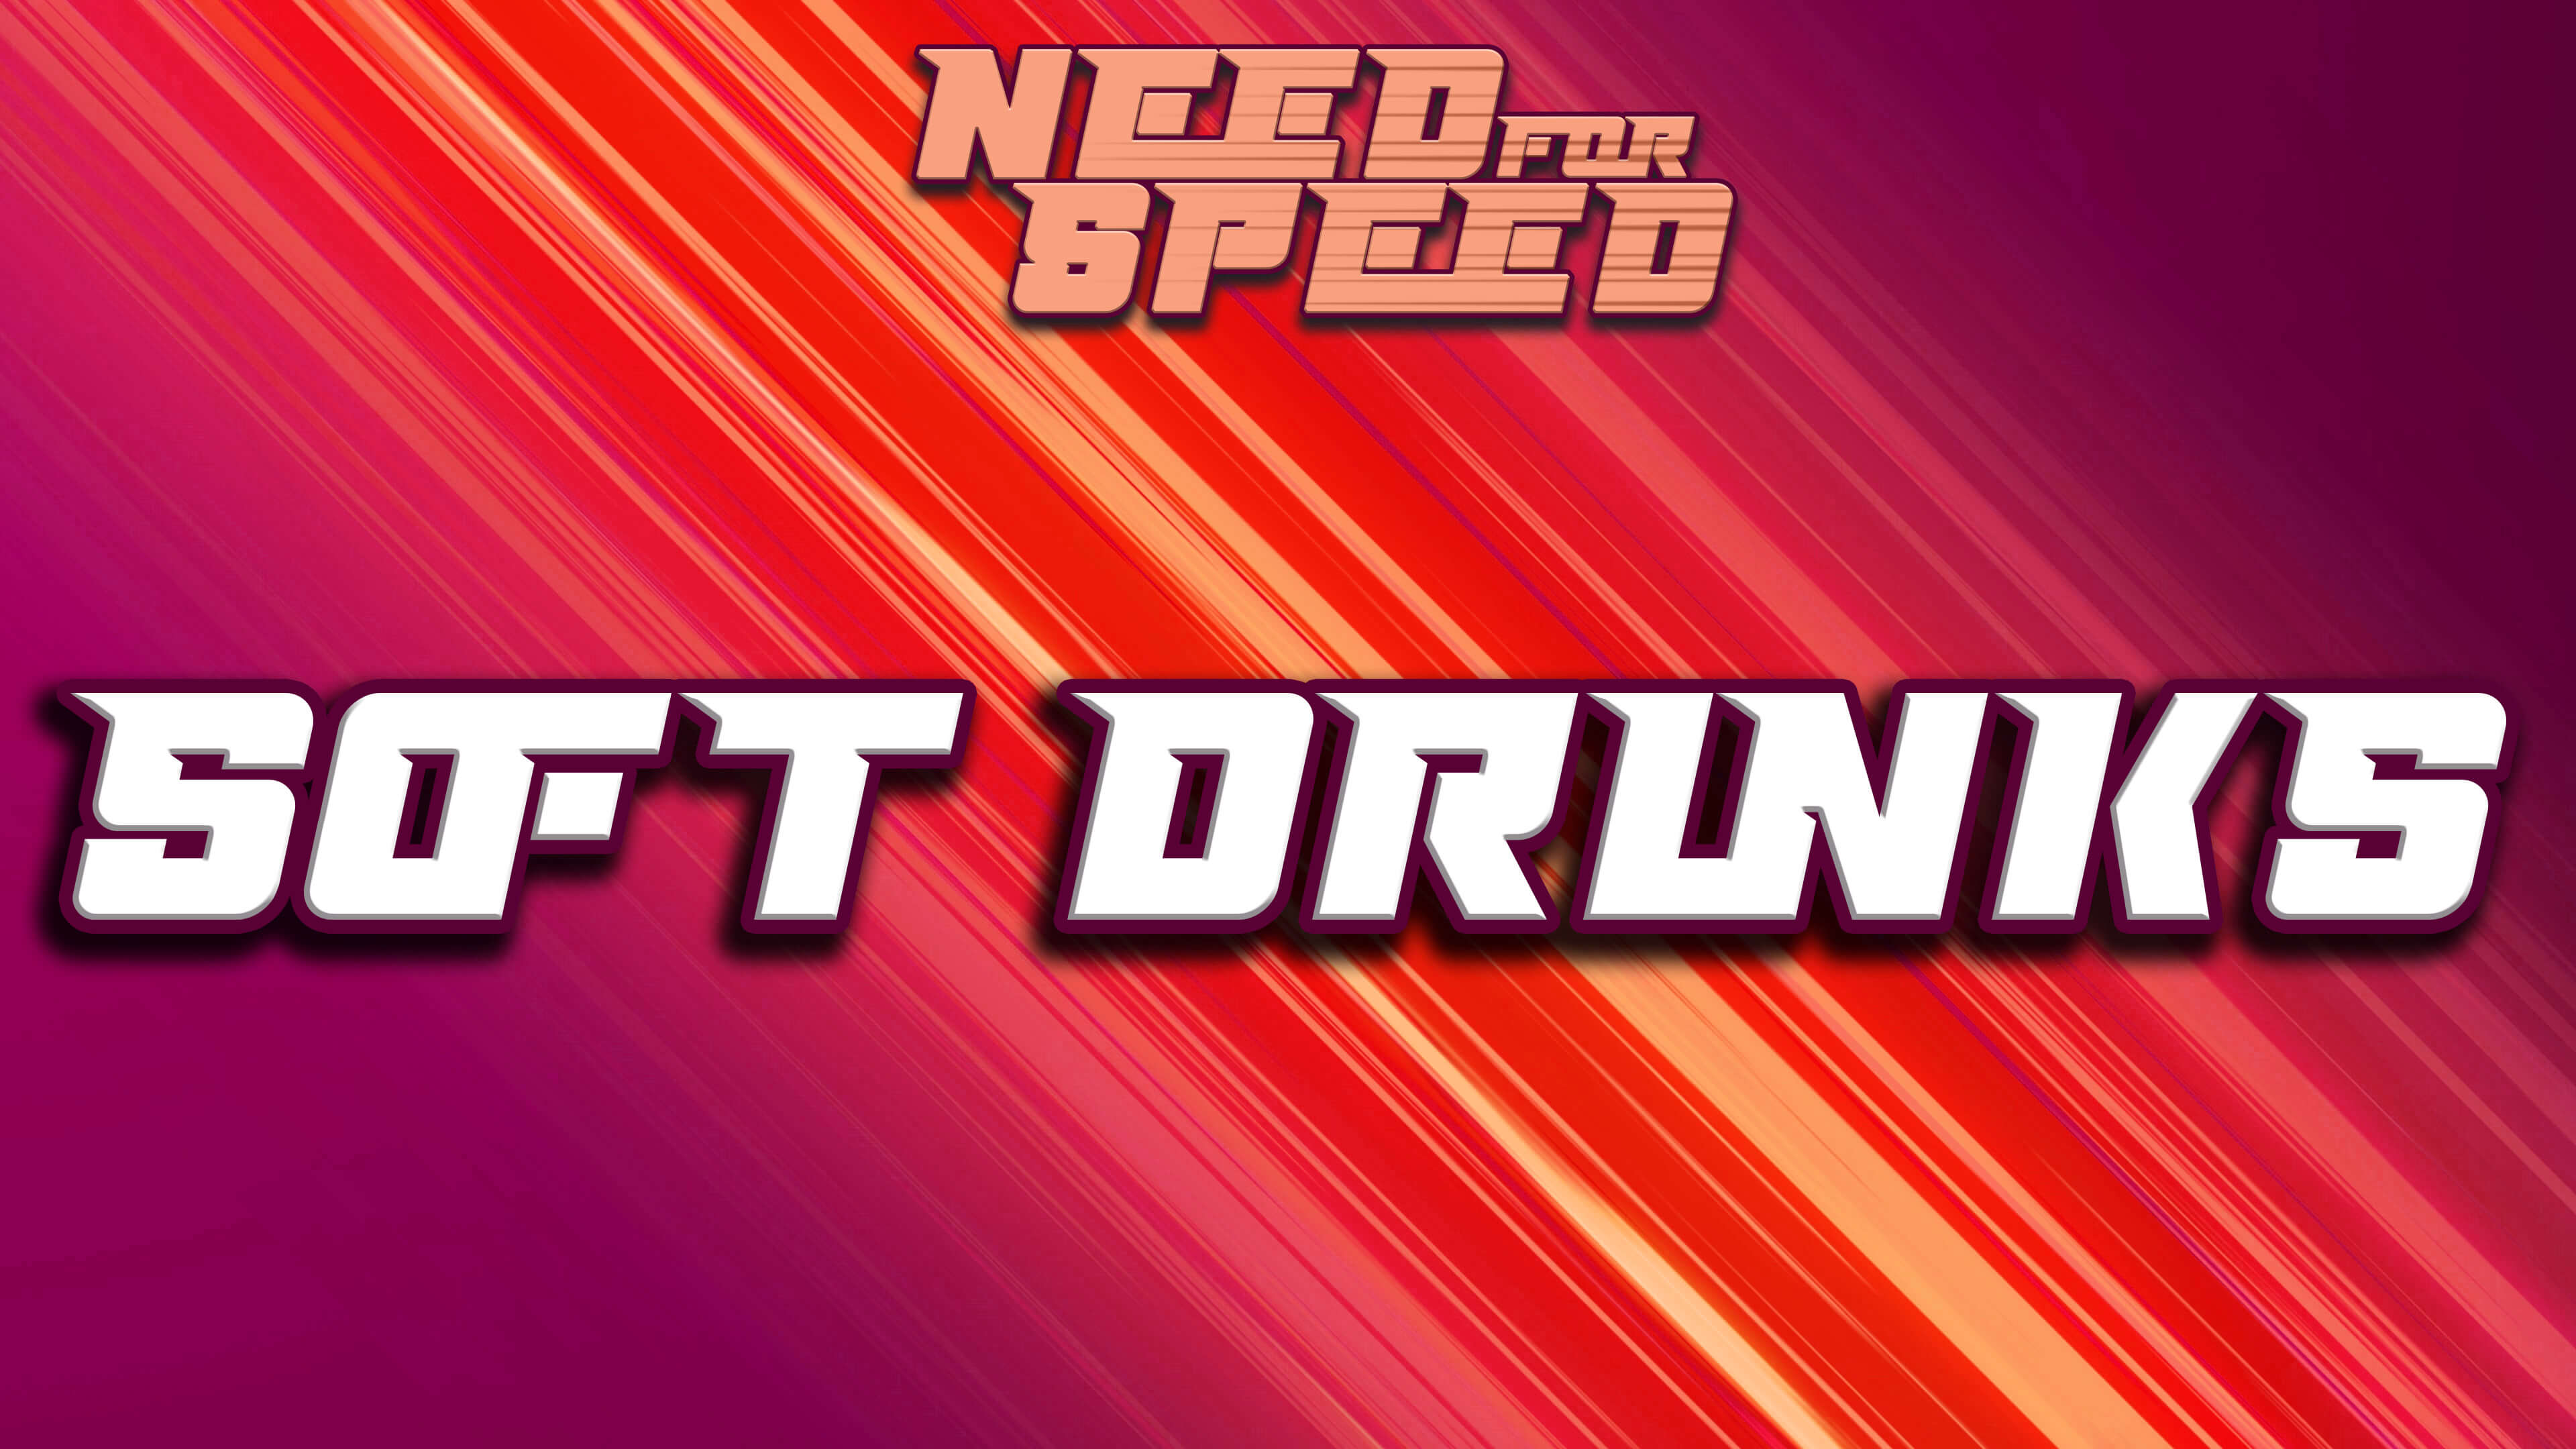 Need For Speed Volume 2